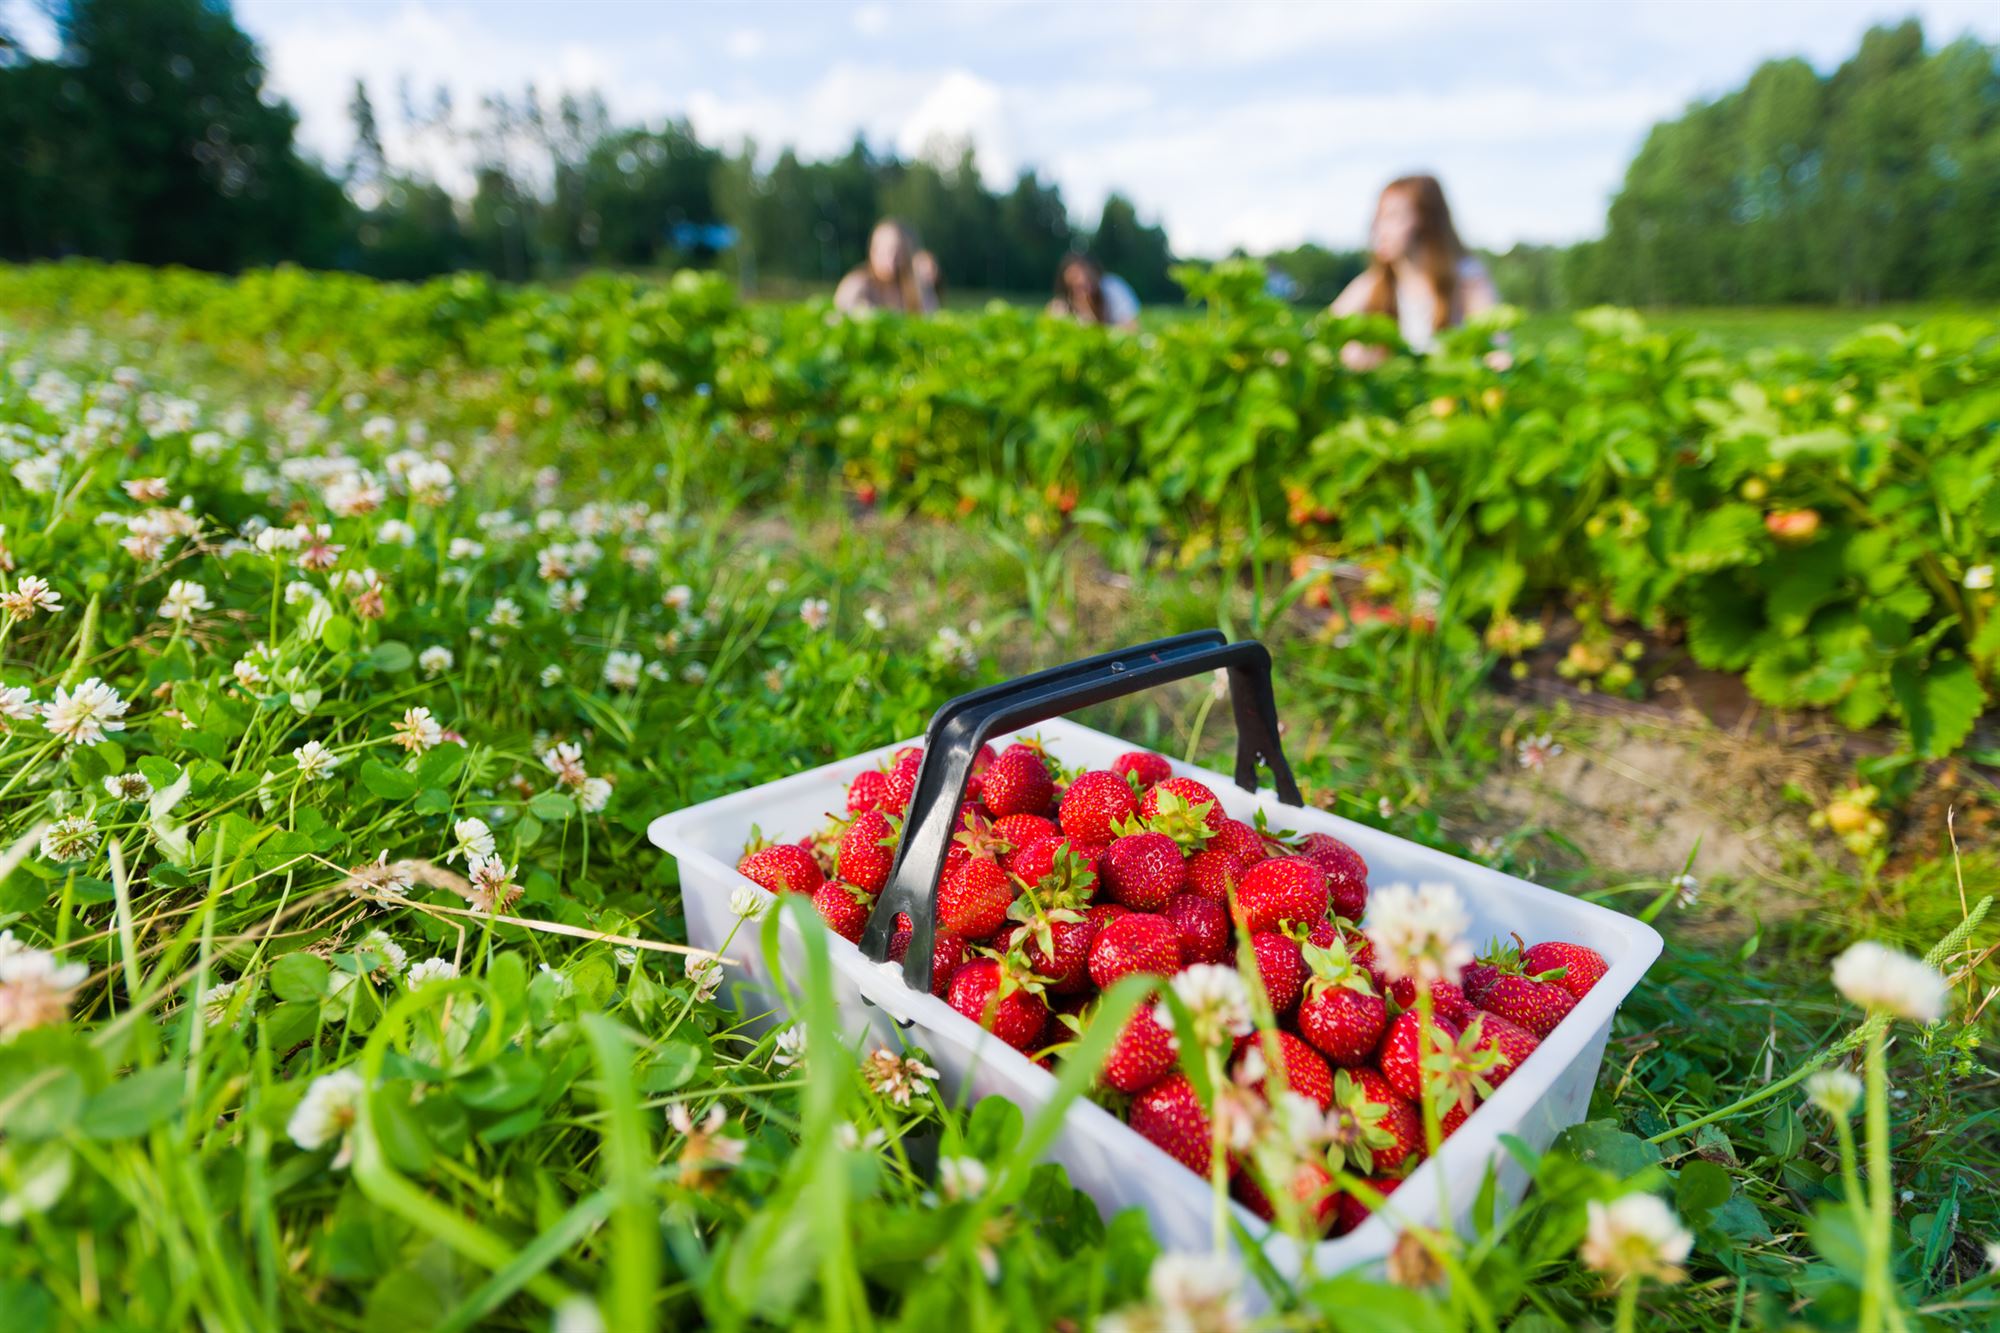 Strawberry fields forever in Montvale? — Pascack Press and Northern Valley Press